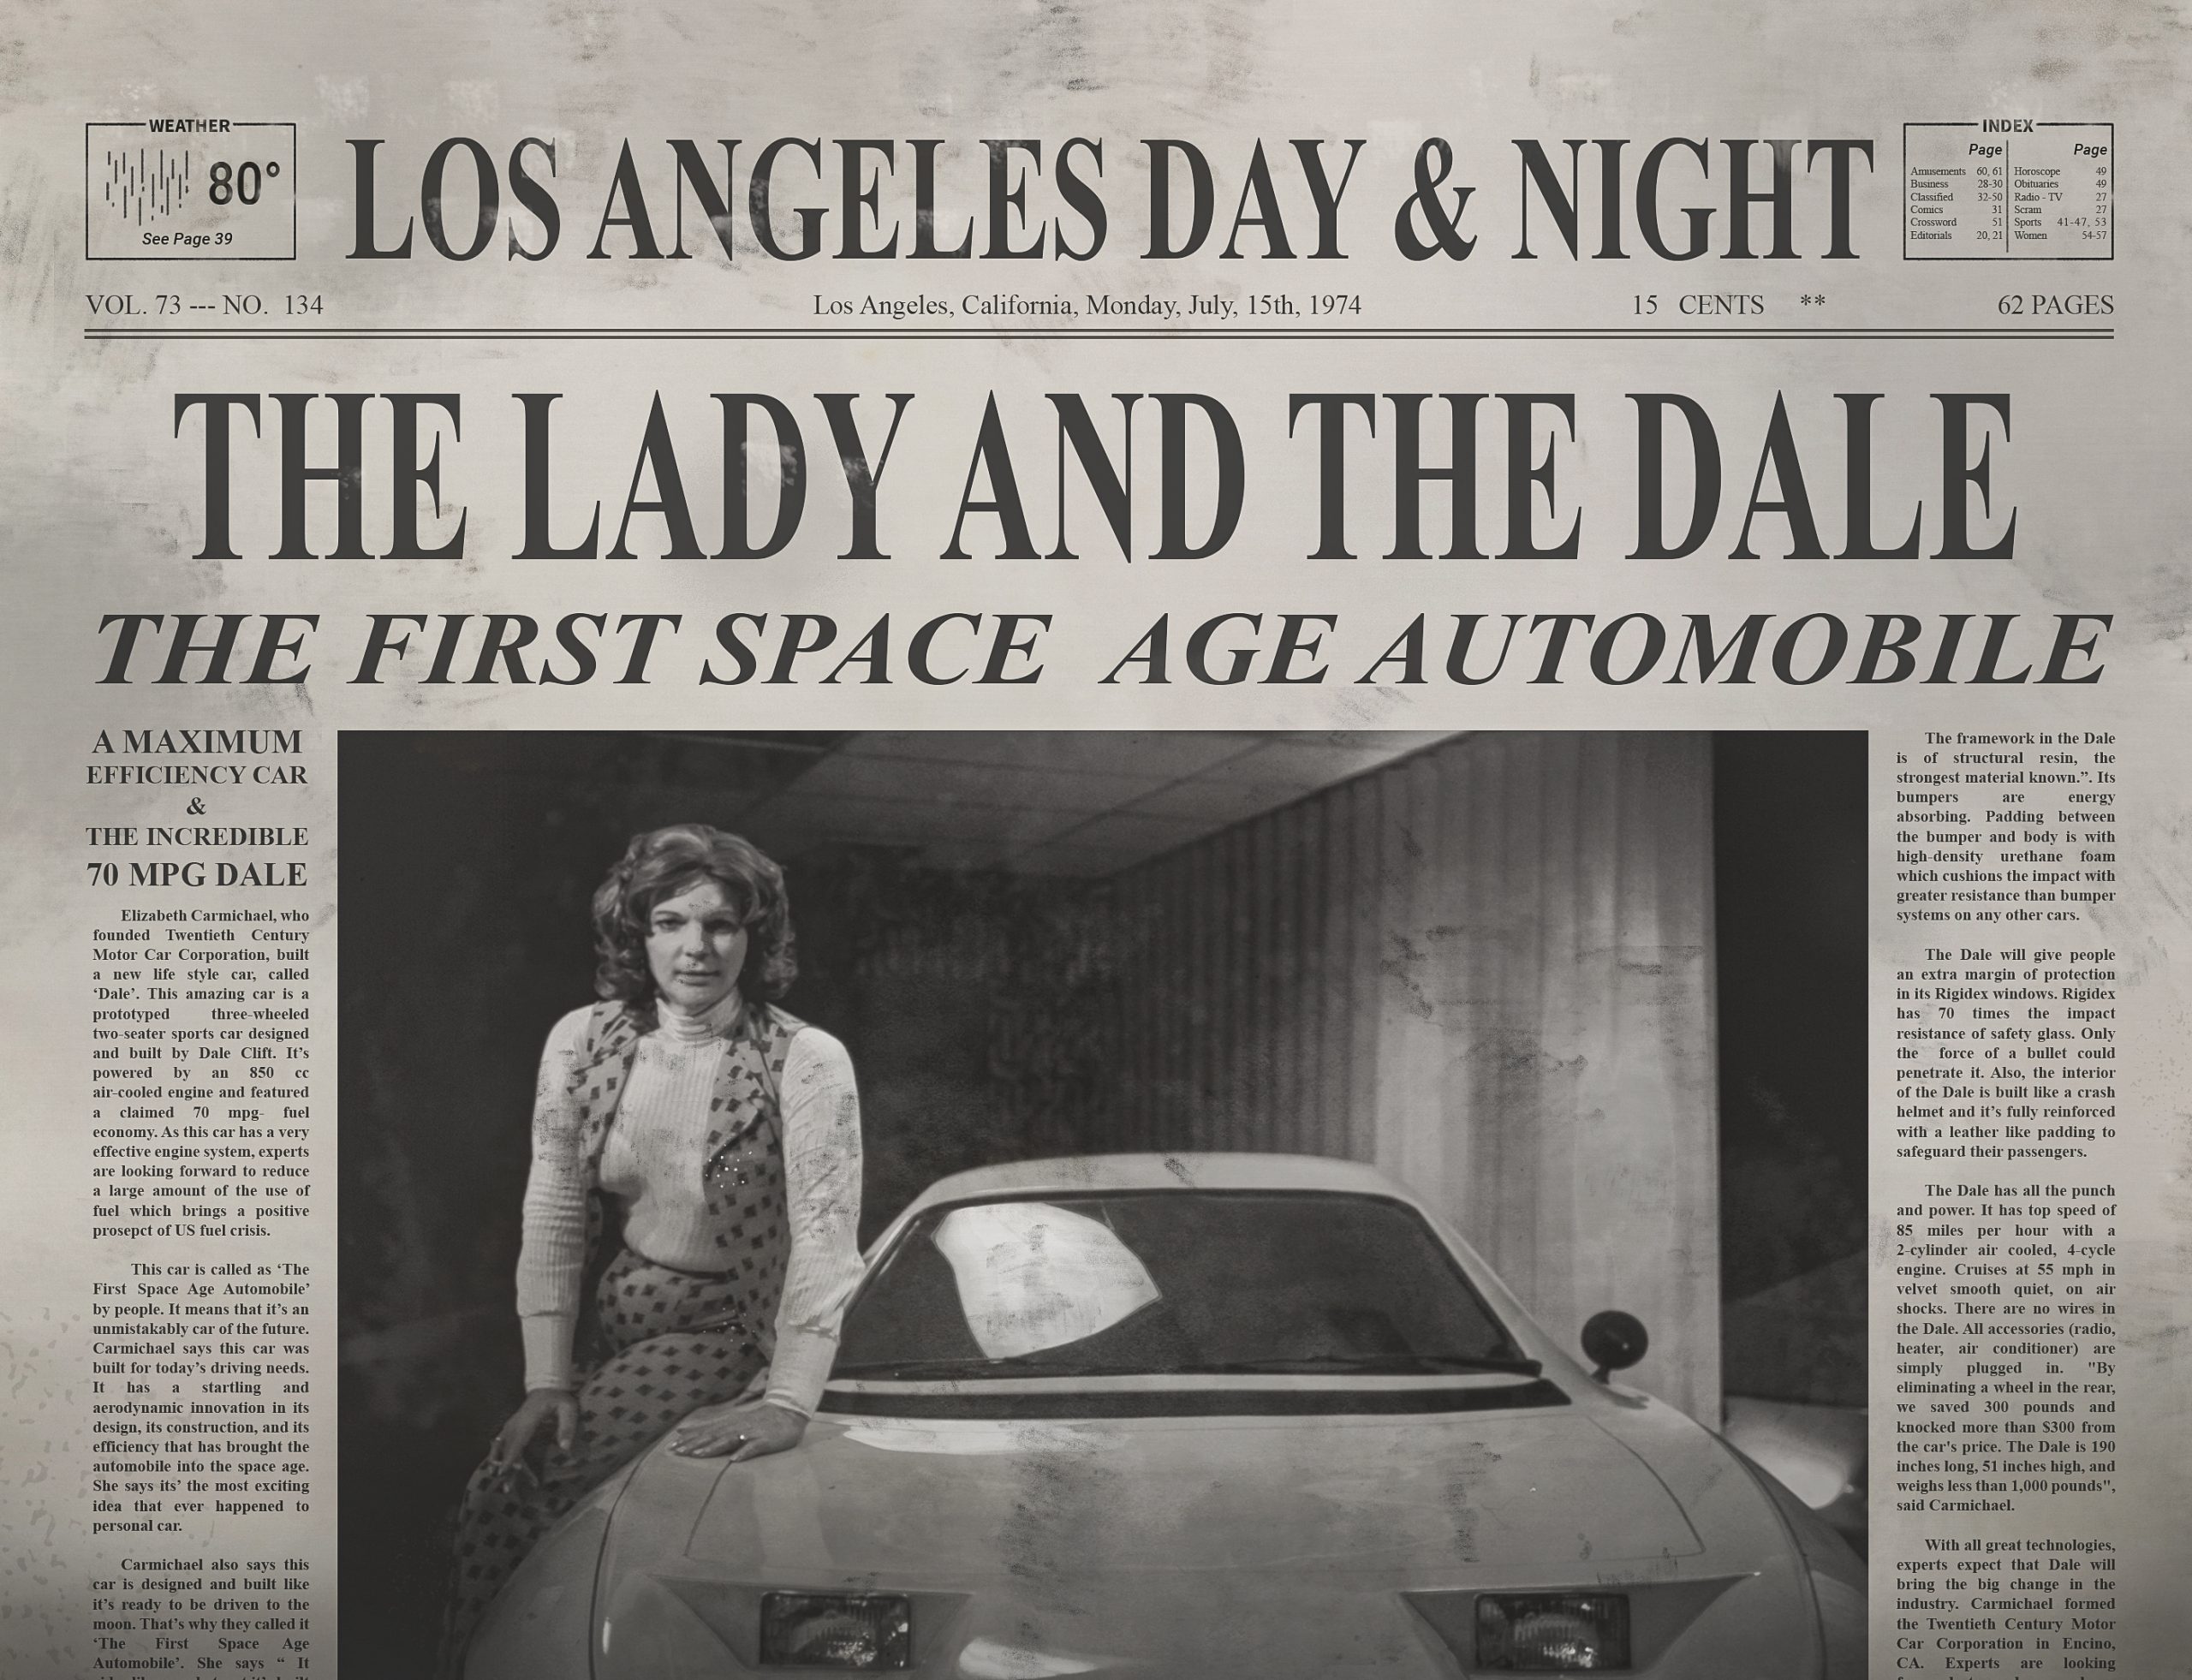 the lady and the dale season 2